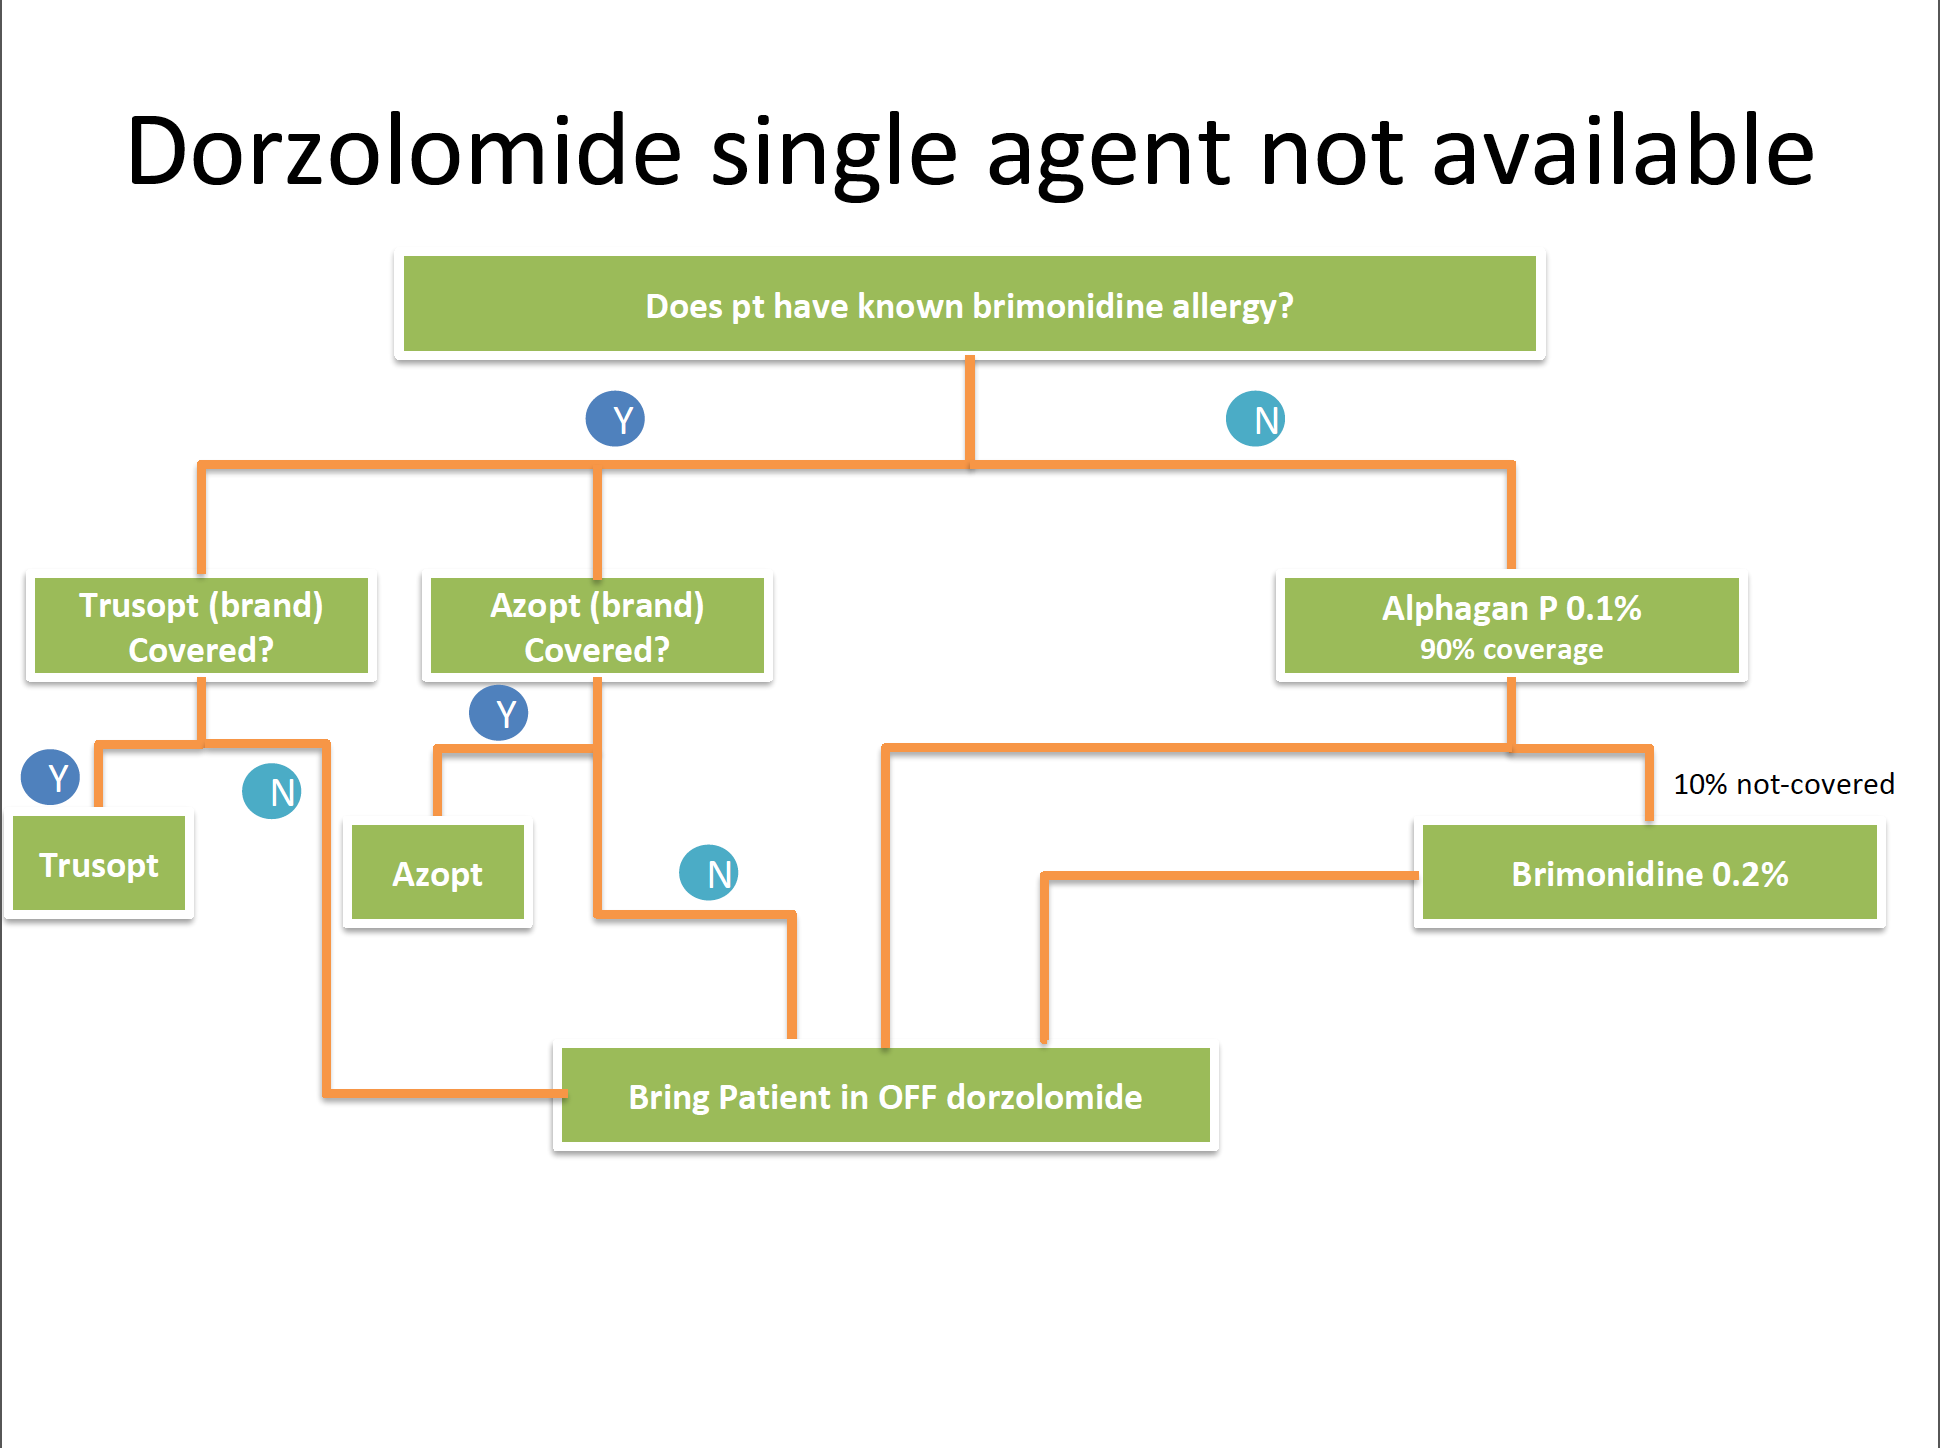 Breaking down the dorzolamide shortage